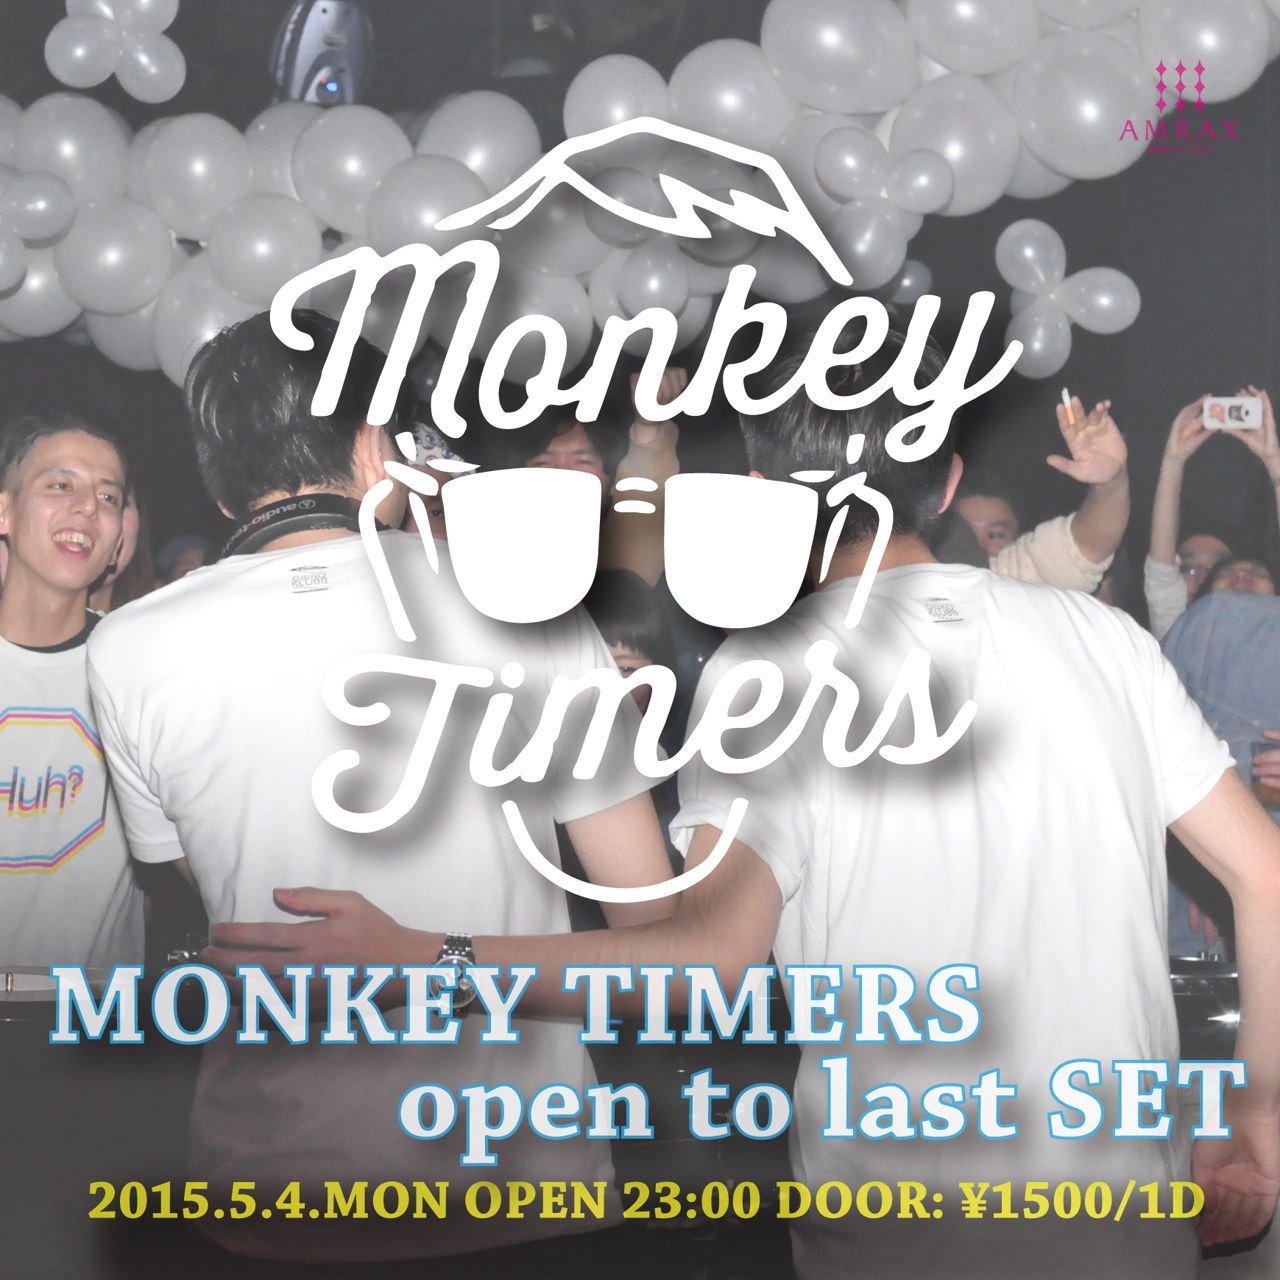 MONKEY TIMERS open to last SET